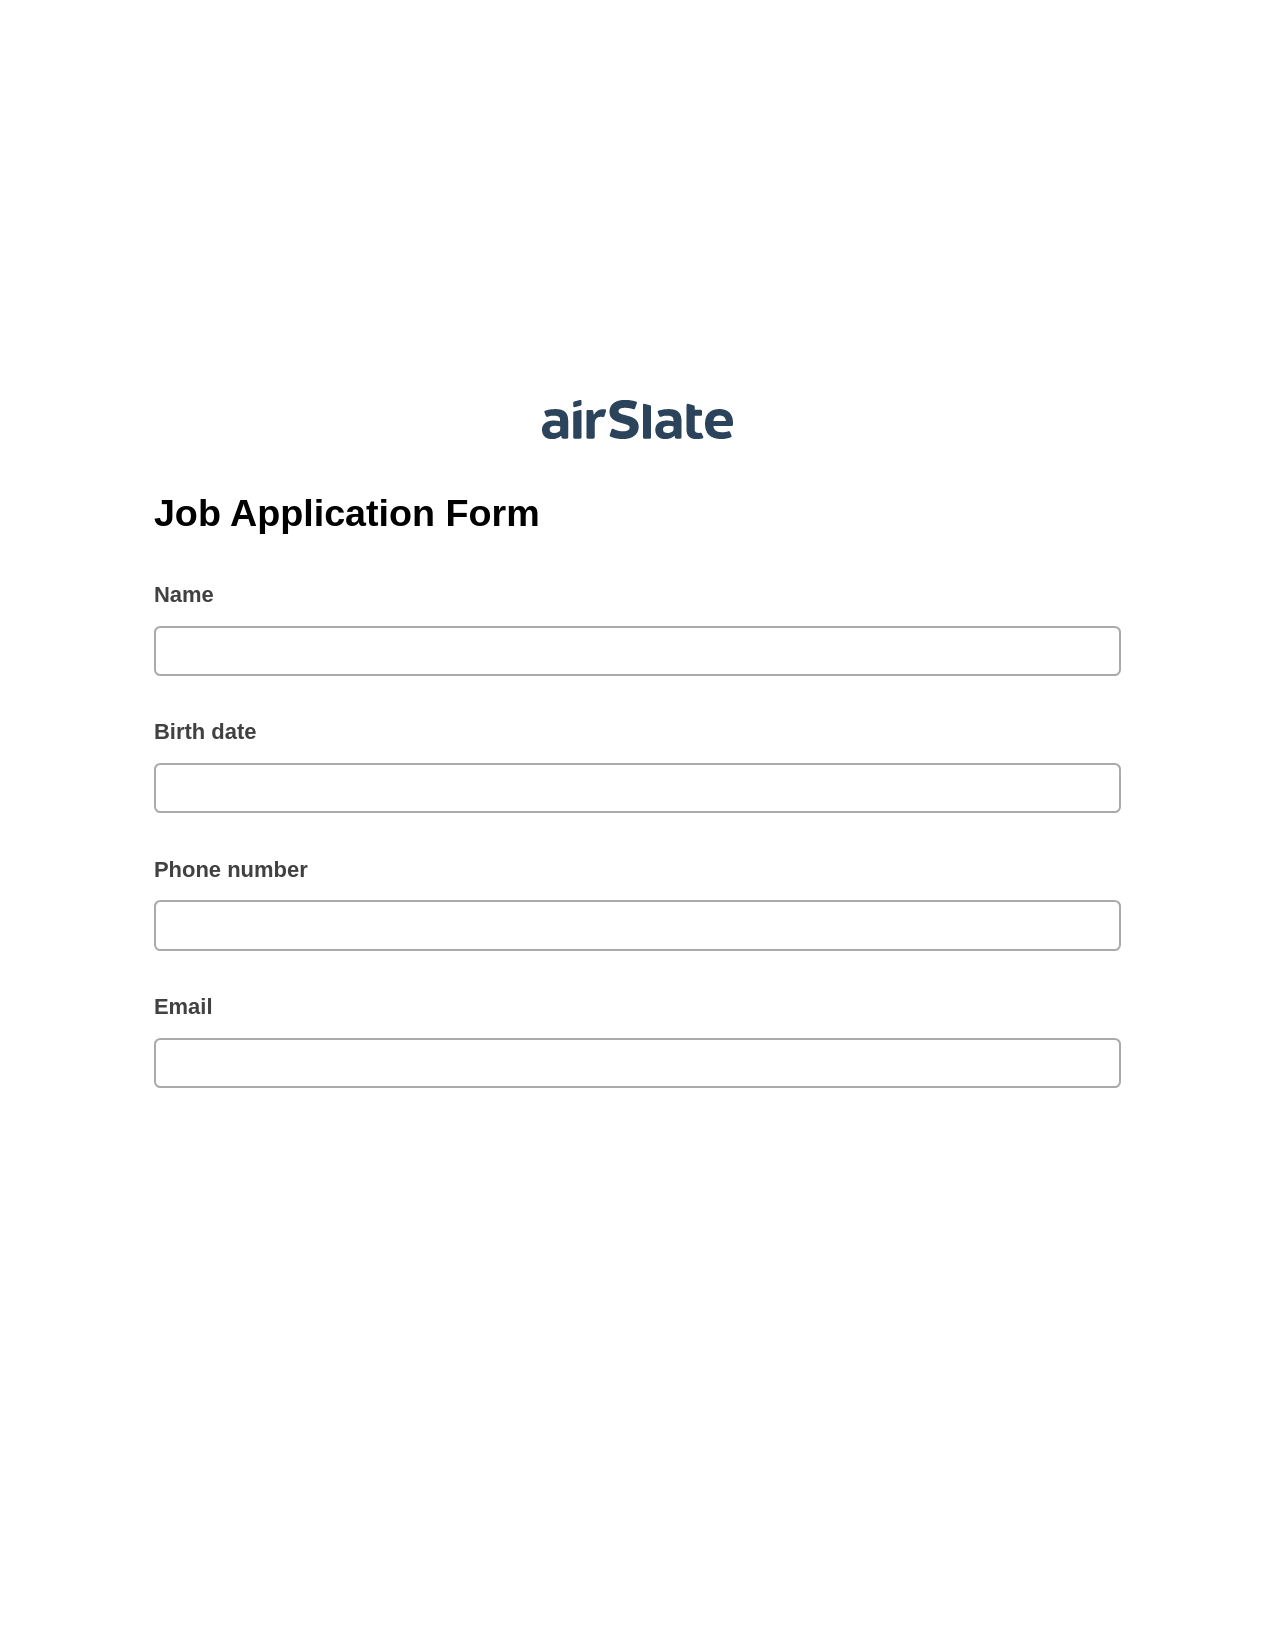 Multirole Job Application Form Pre-fill Document Bot, Assign Roles to Recipients Bot, Export to Excel 365 Bot